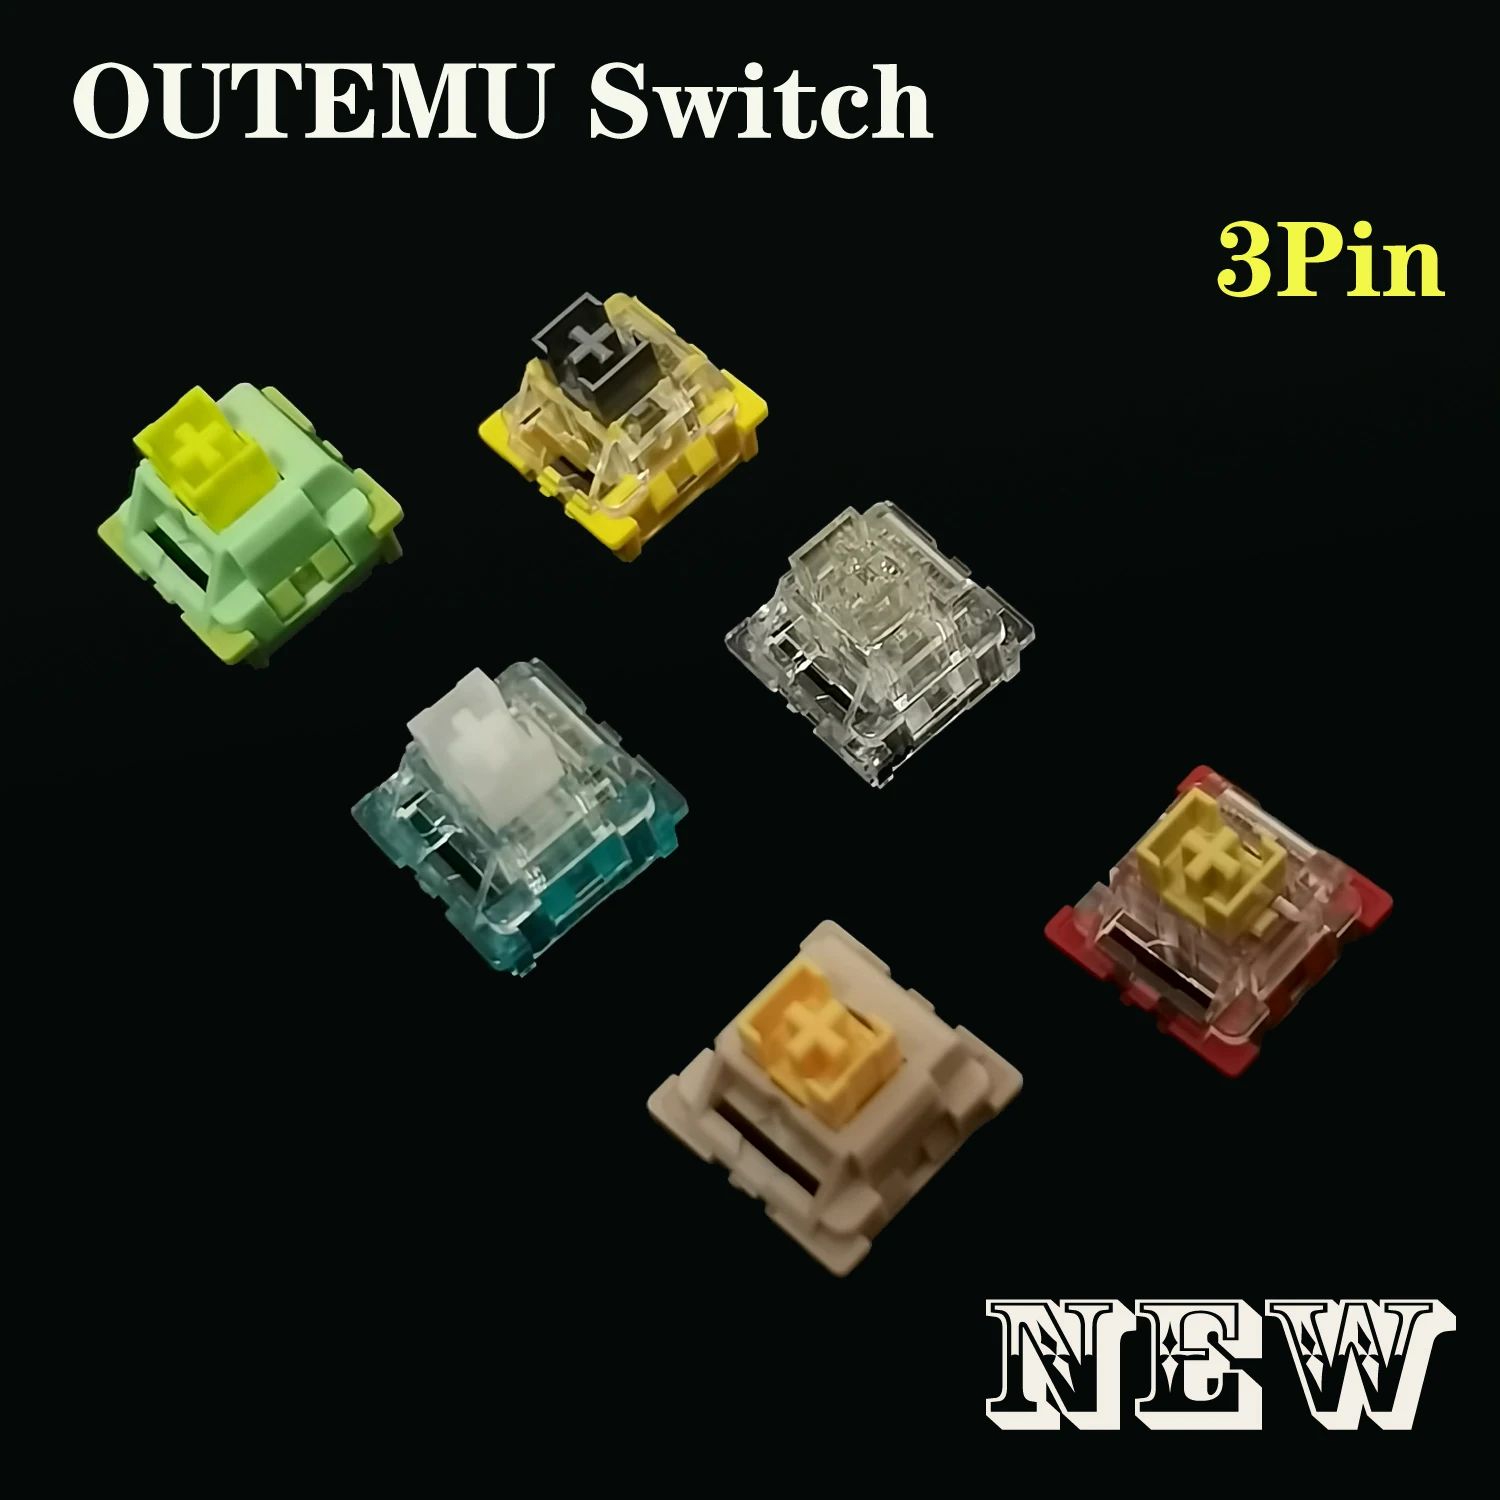 

Outemu Silent Switches Mechanical Keyboard Switch 3Pin Clicky Linear Tactile Peach Holy Panda Lemon Switch RGB Gaming MX Switch